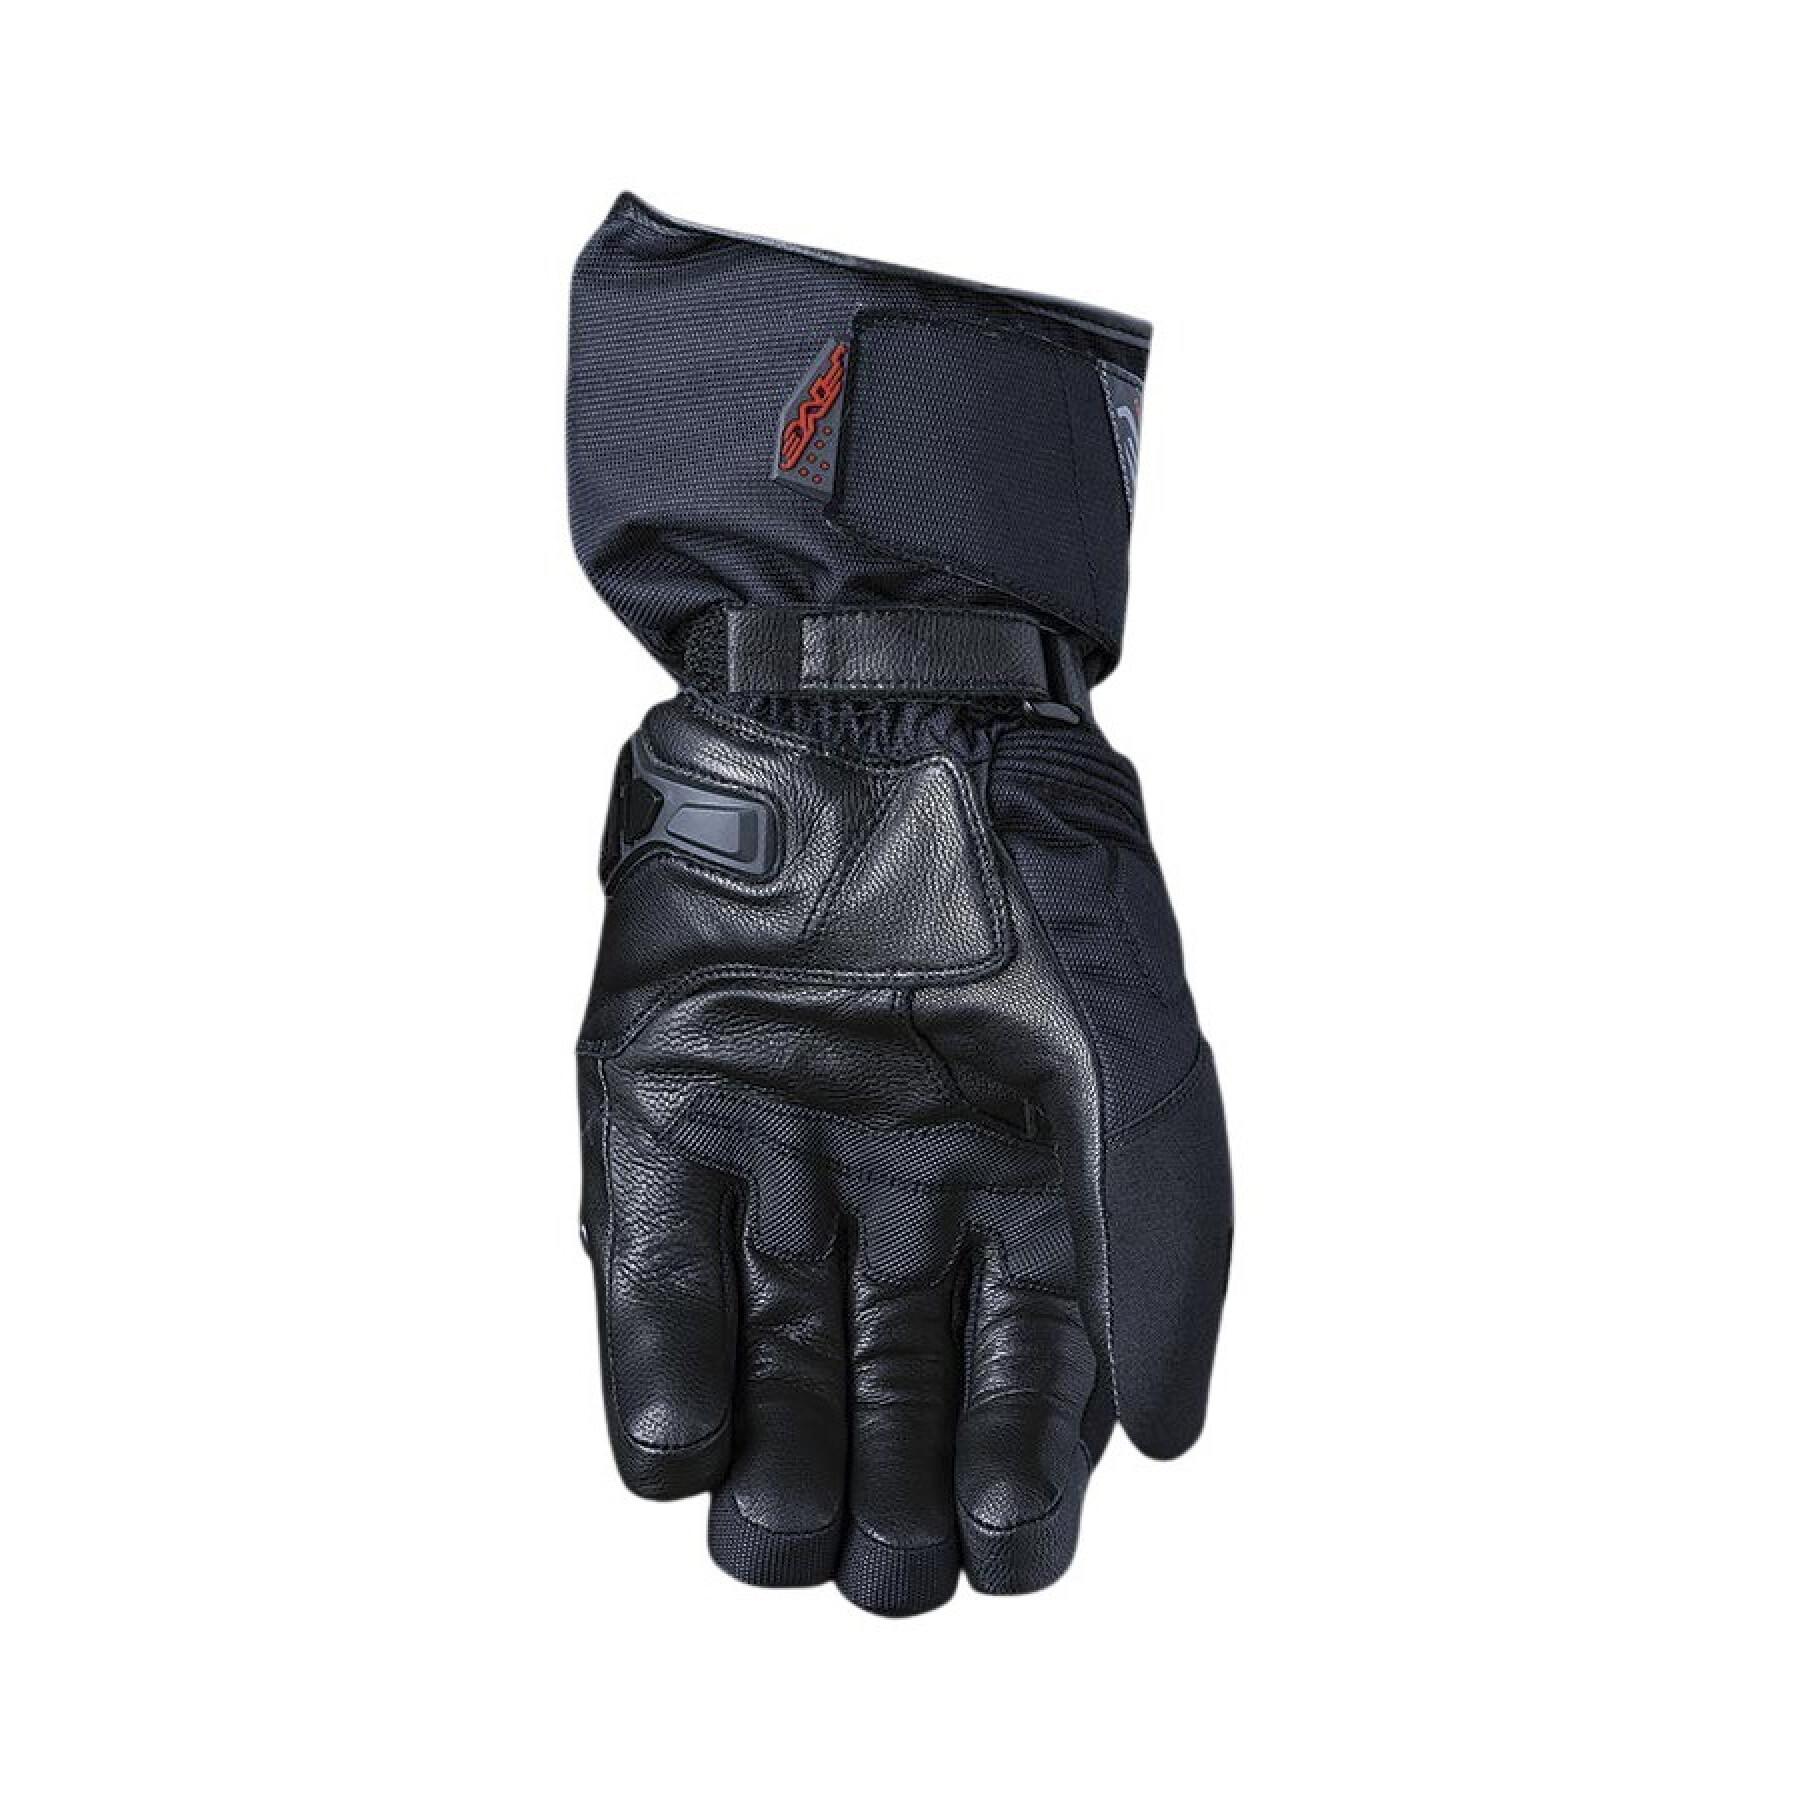 Winter motorcycle gloves Five hg2 wp